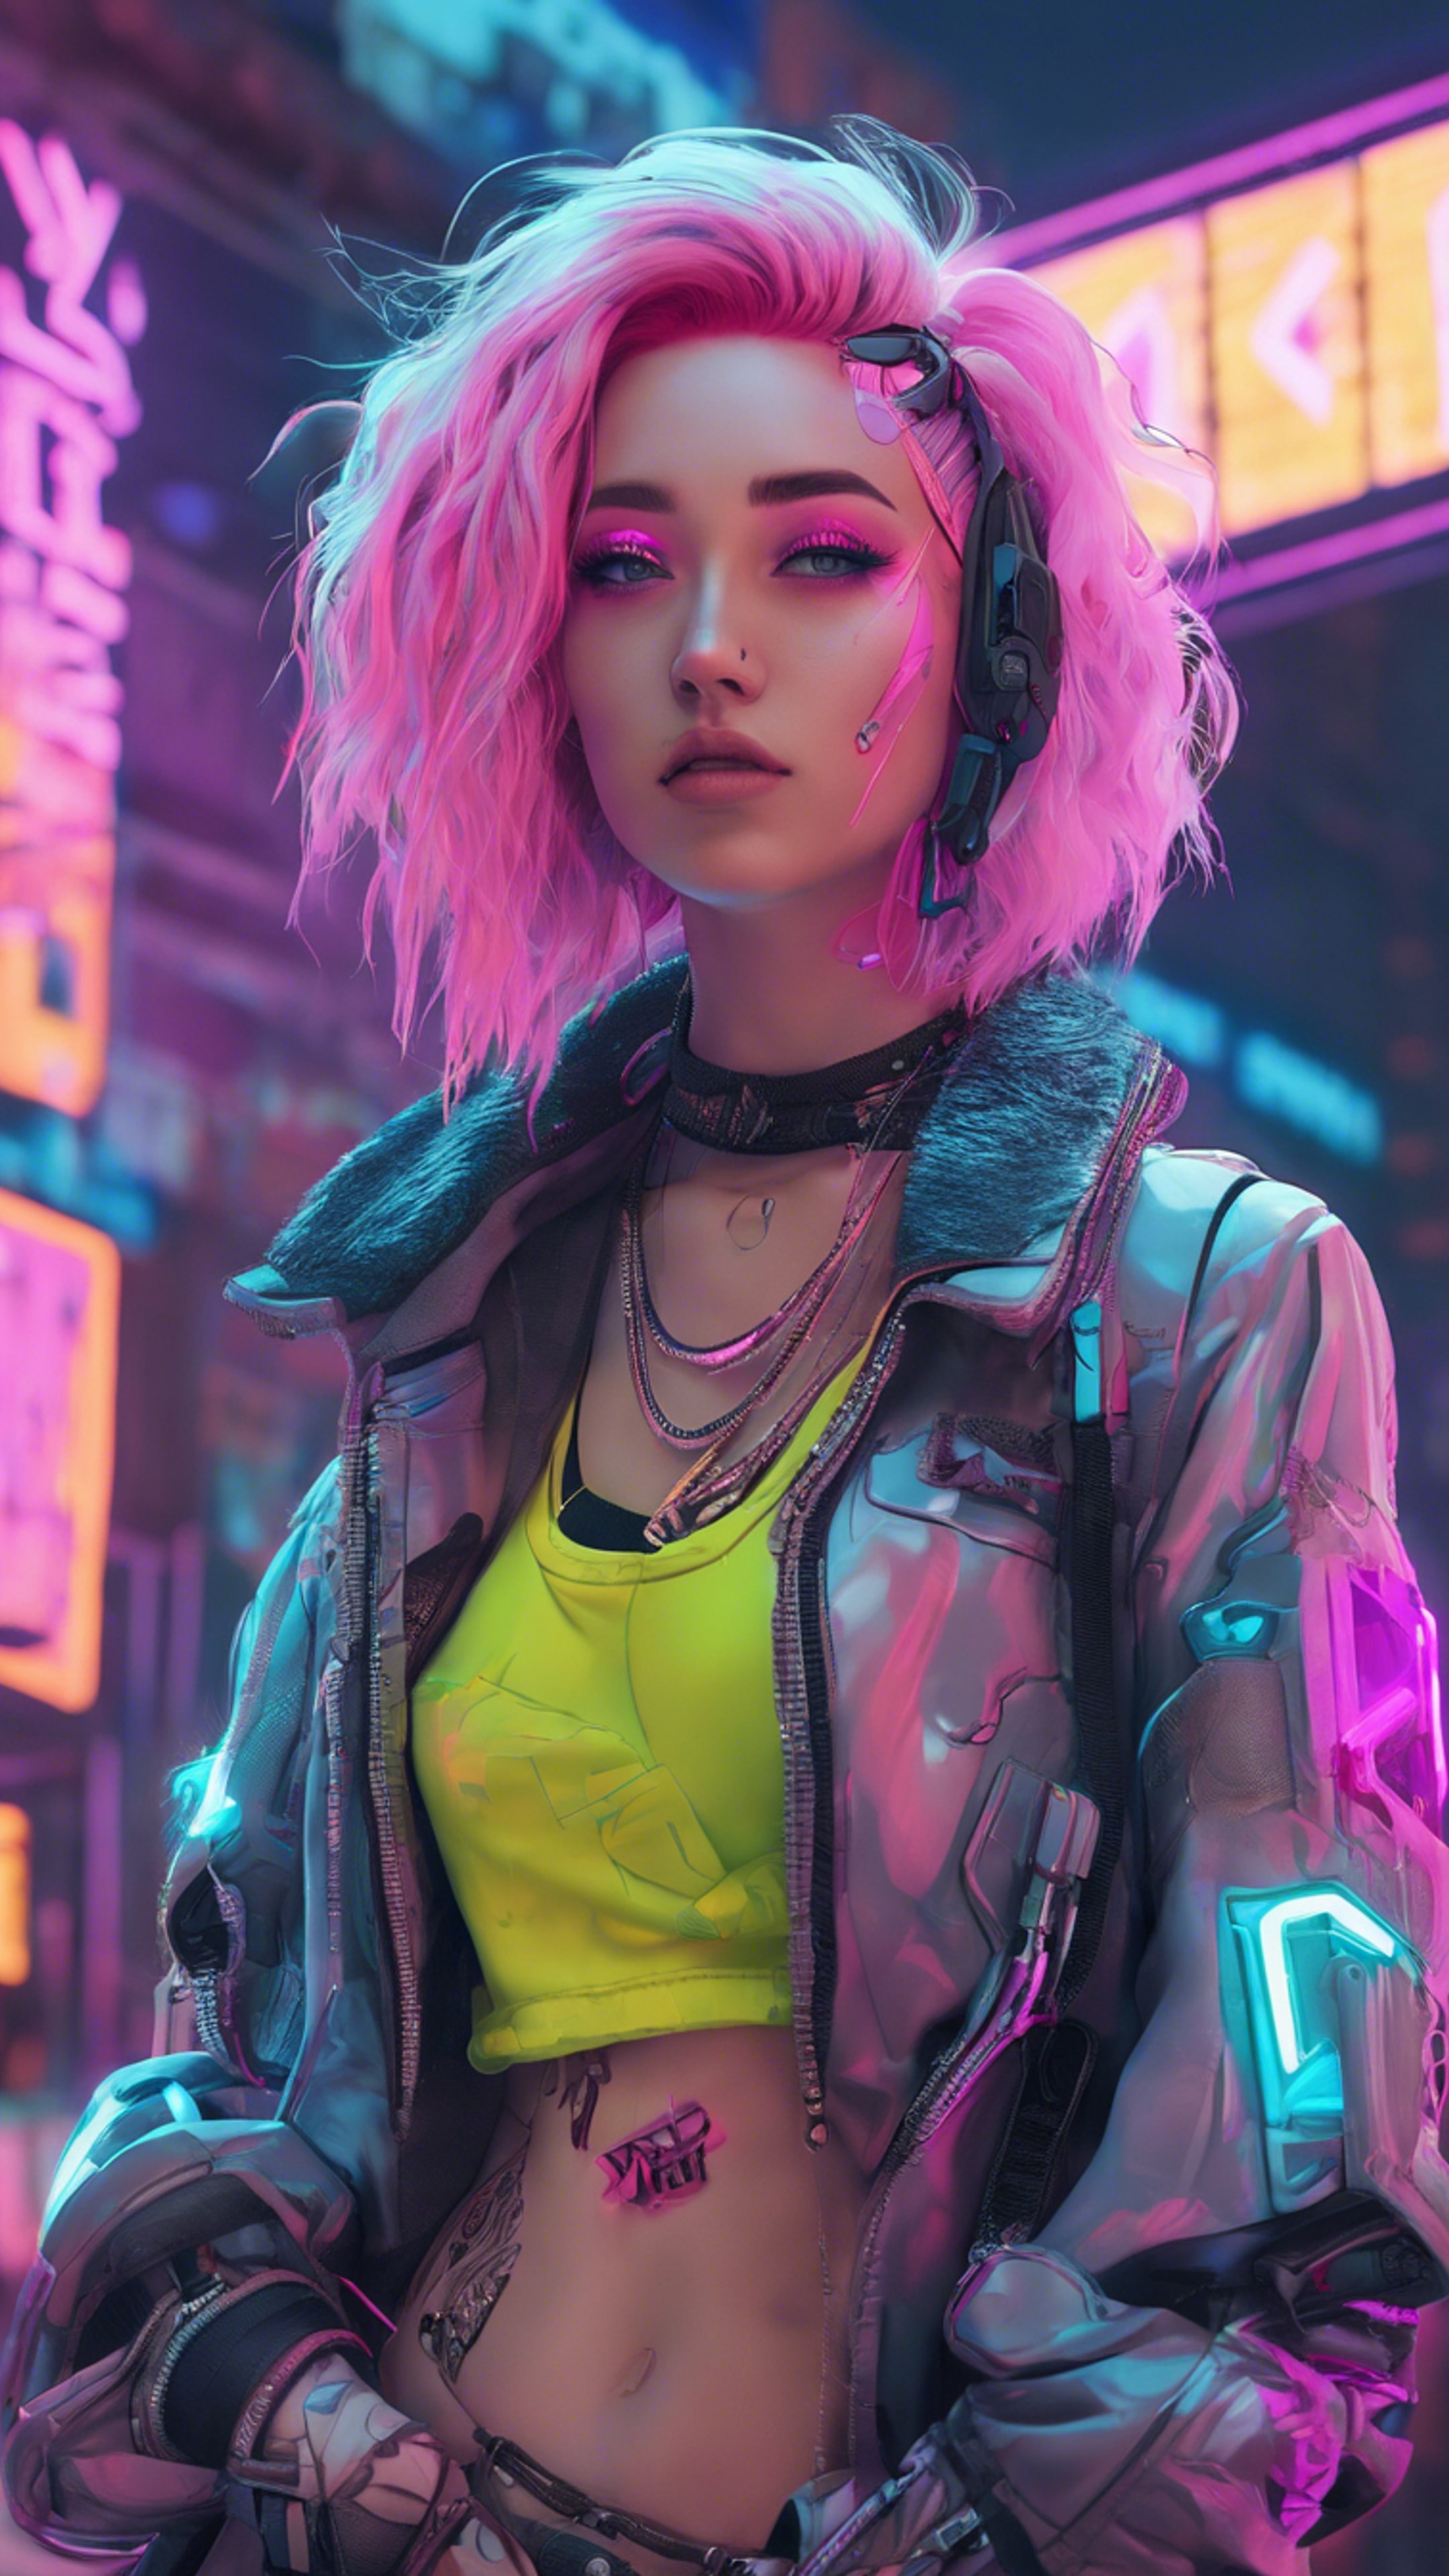 A pastel cyberpunk girl with brightly colored hair, standing in front of a neon sign. Fondo de pantalla[dbbad63d7b584975aa4e]